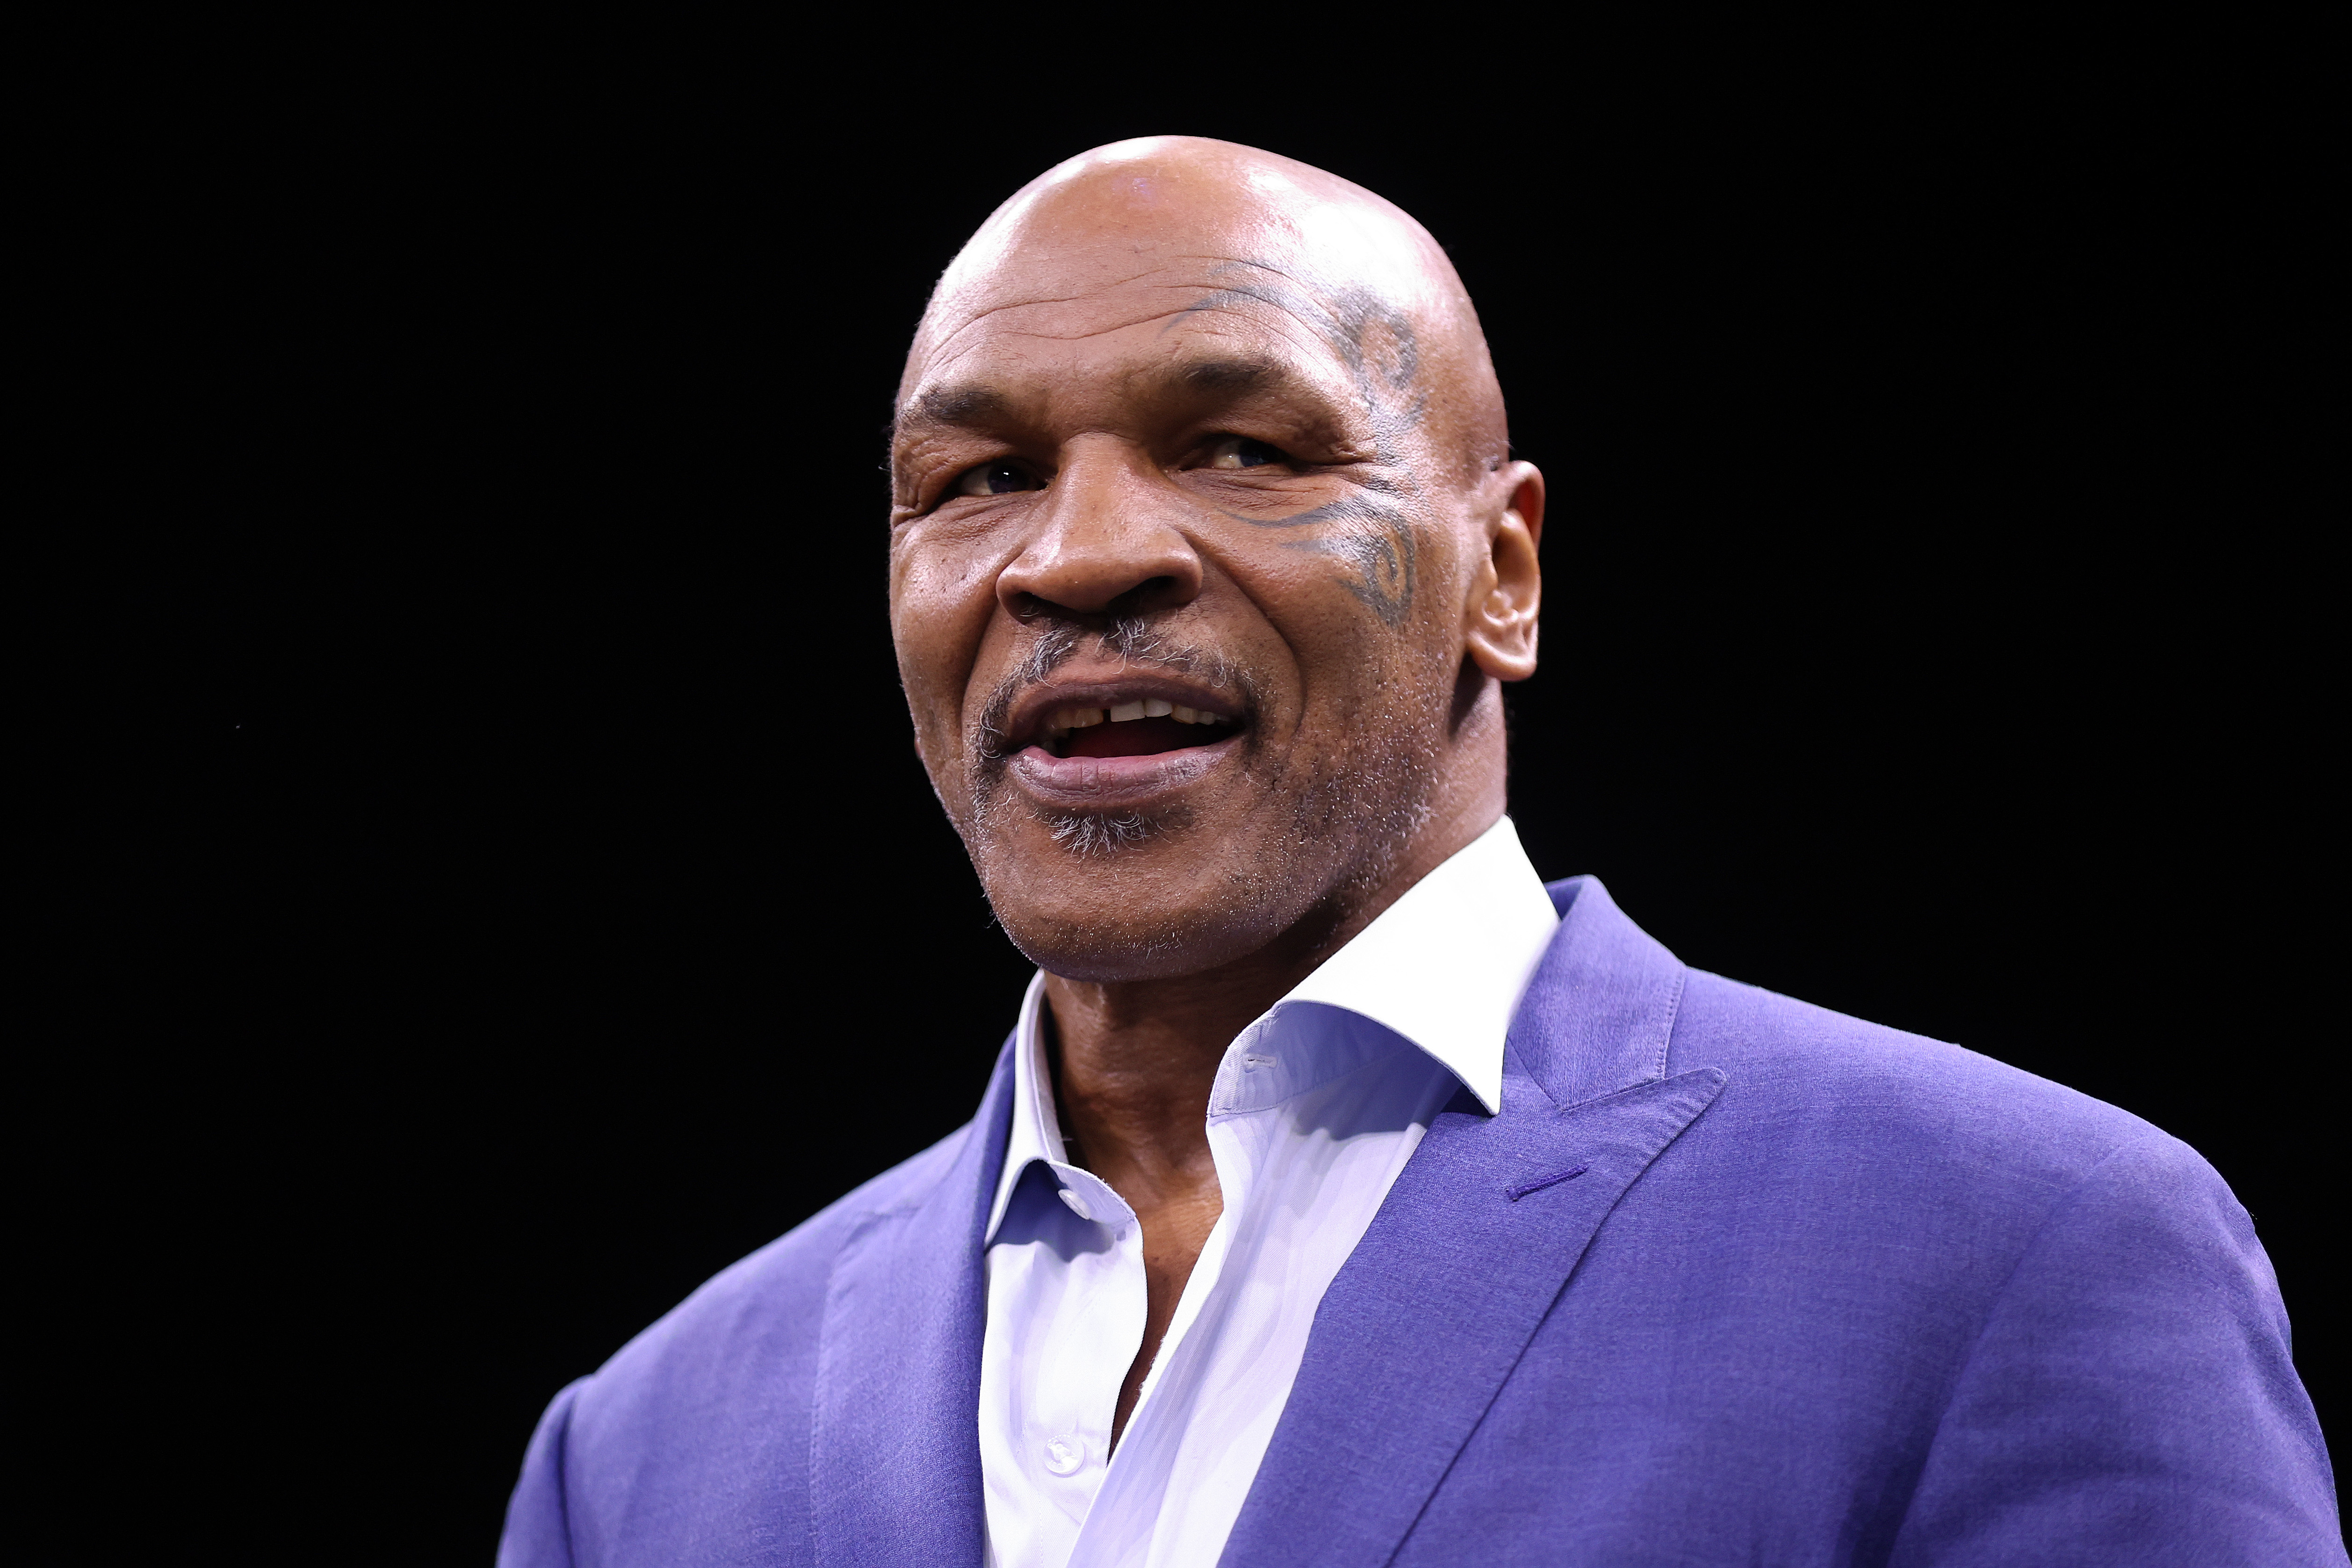 Mike Tyson Roasted For Handling Hasbulla Like A Child